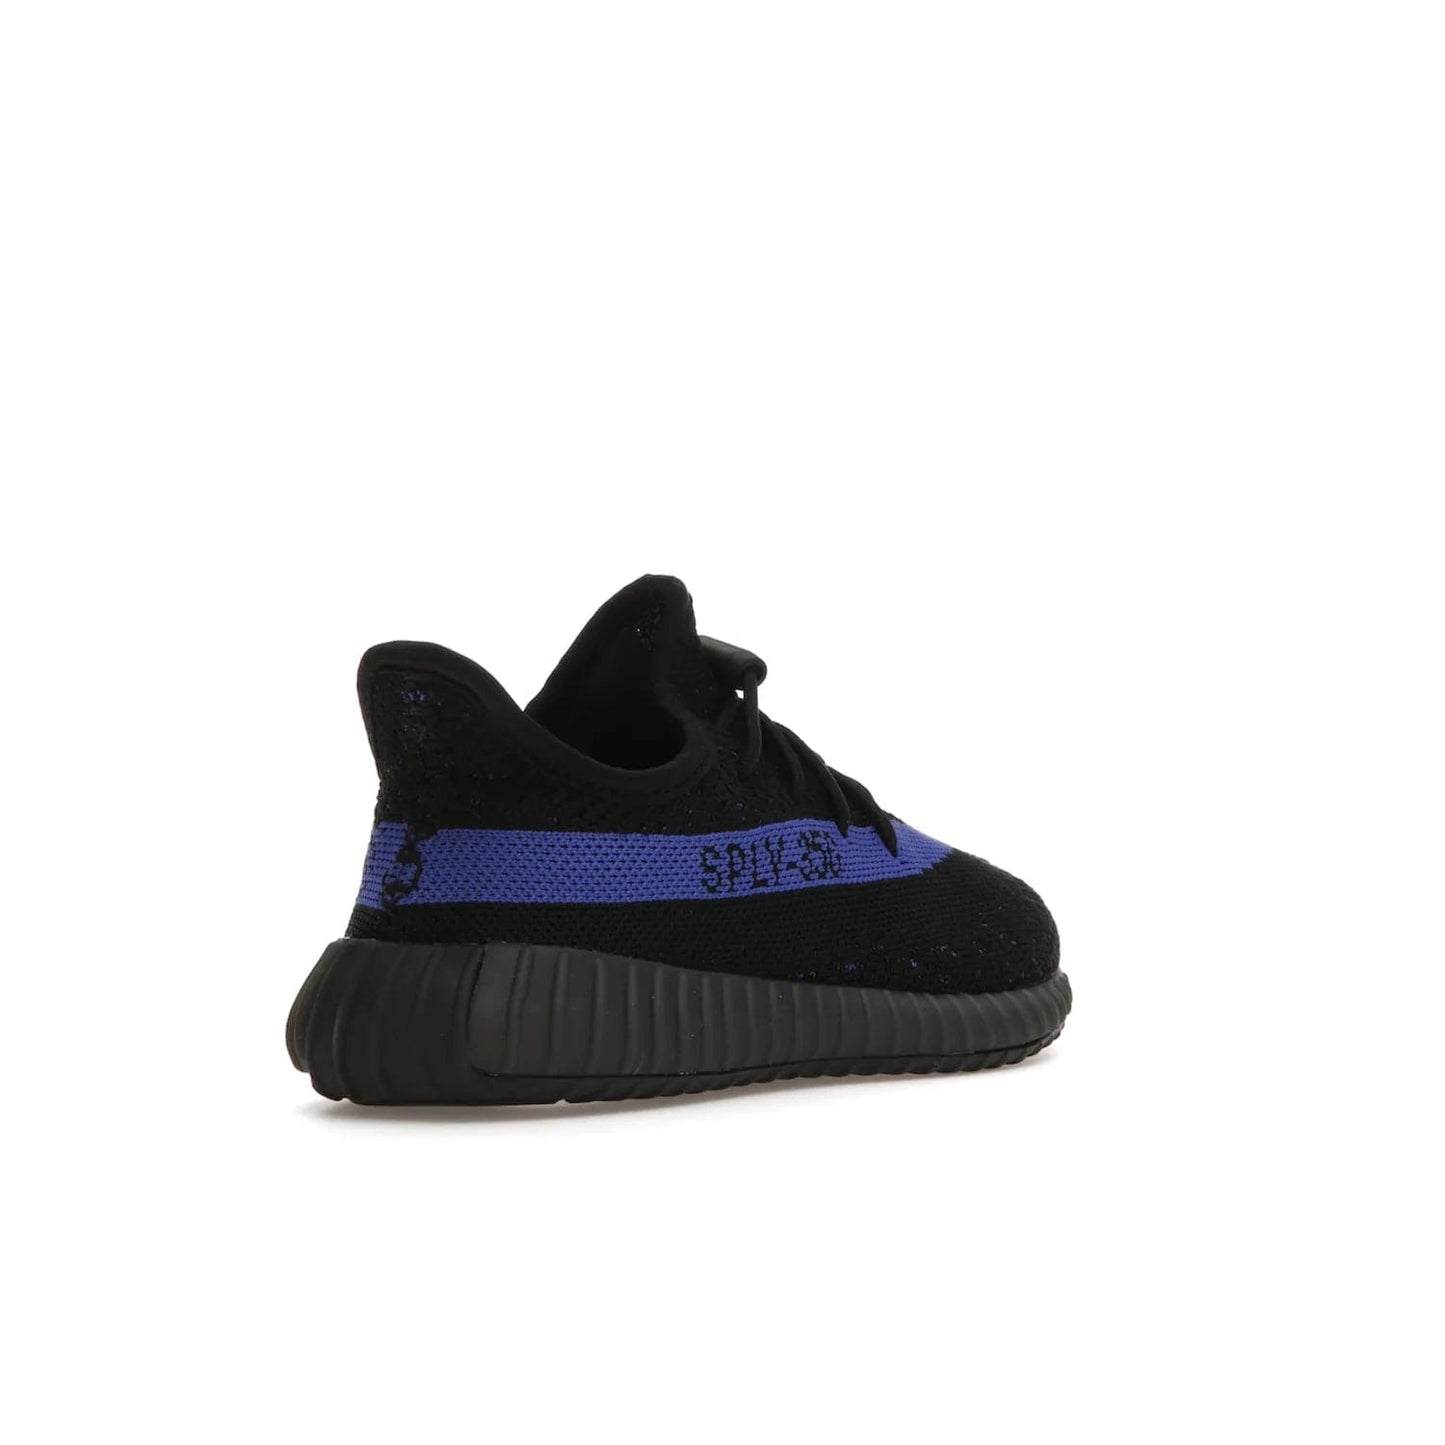 adidas Yeezy Boost 350 V2 Dazzling Blue (Kids) - Image 32 - Only at www.BallersClubKickz.com - Shop the adidas Yeezy Boost 350 V2 Dazzling Blue (Kids). Features a black Primeknit upper with a royal blue 'SPLY-350' streak and a full-length Boost midsole. Durable rubber outsole provides plenty of traction. Available for $160.